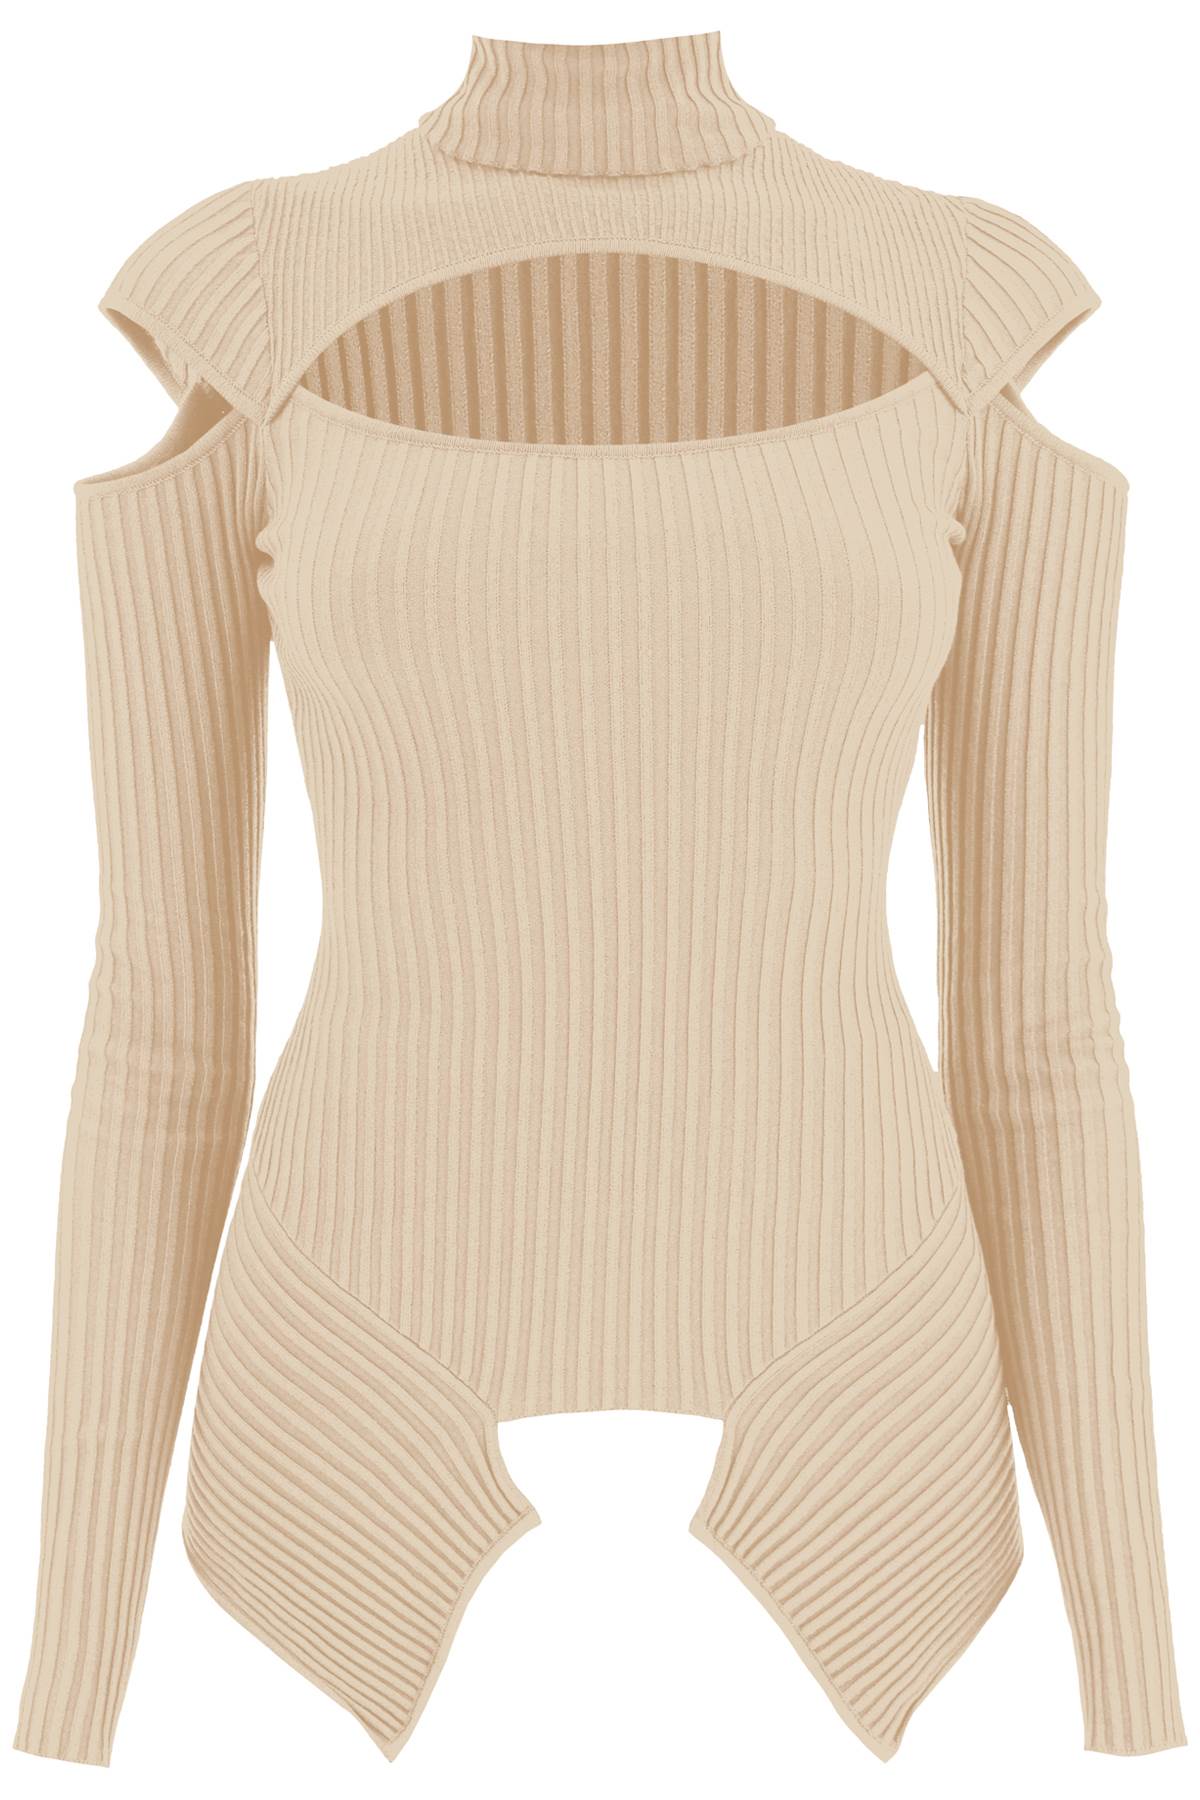 ANDREADAMO Turtleneck Sweater With Cut-out Details